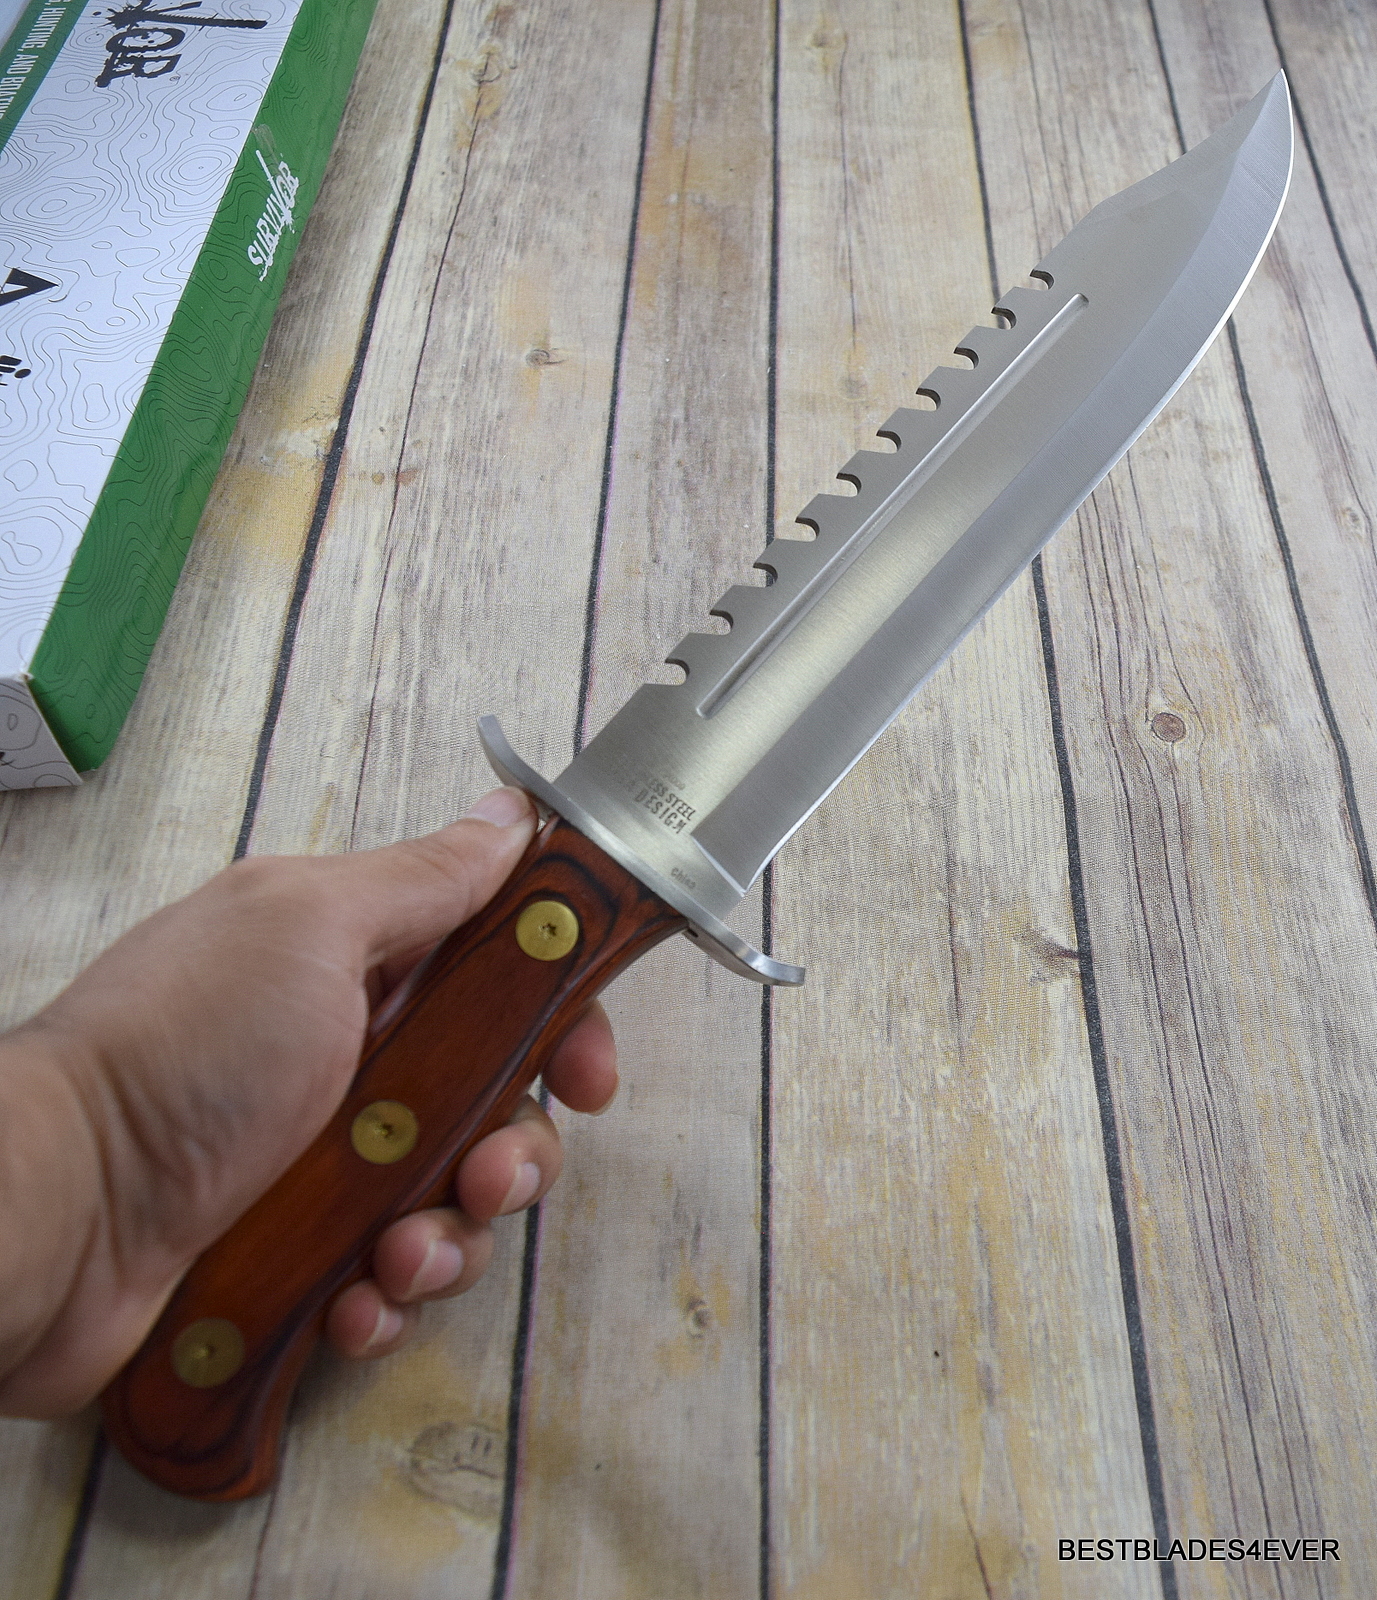 16.5 LARGE WOOD HANDLE BOWIE HUNTING KNIFE w/ SHEATH Fixed Blade Survival